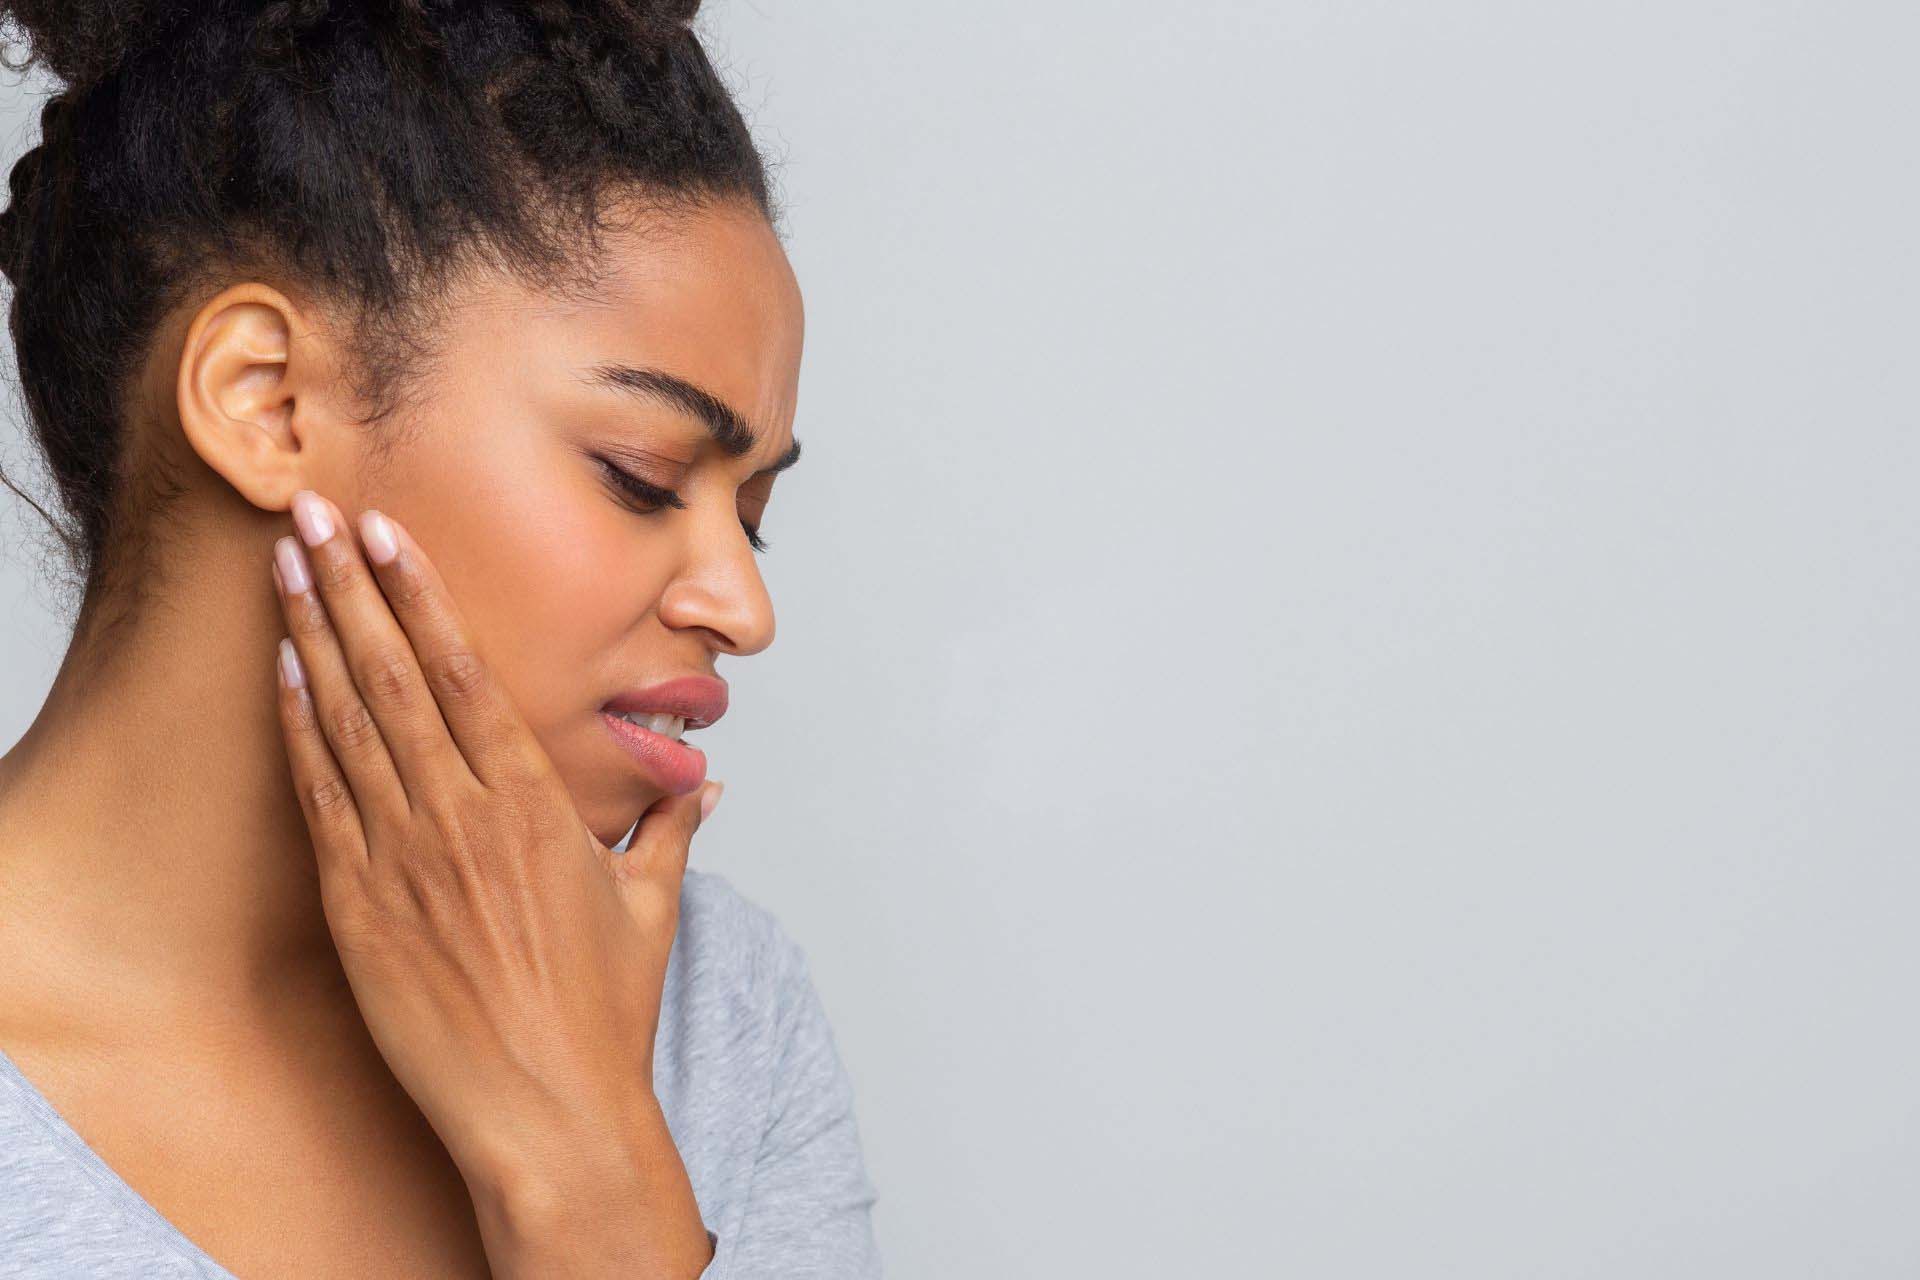 Woman holding jaw due to joint pain by her ears as she sees a TMJ specialist, Dr. Hakim near Westwood, Los Angeles, who is treating TMJ for her.